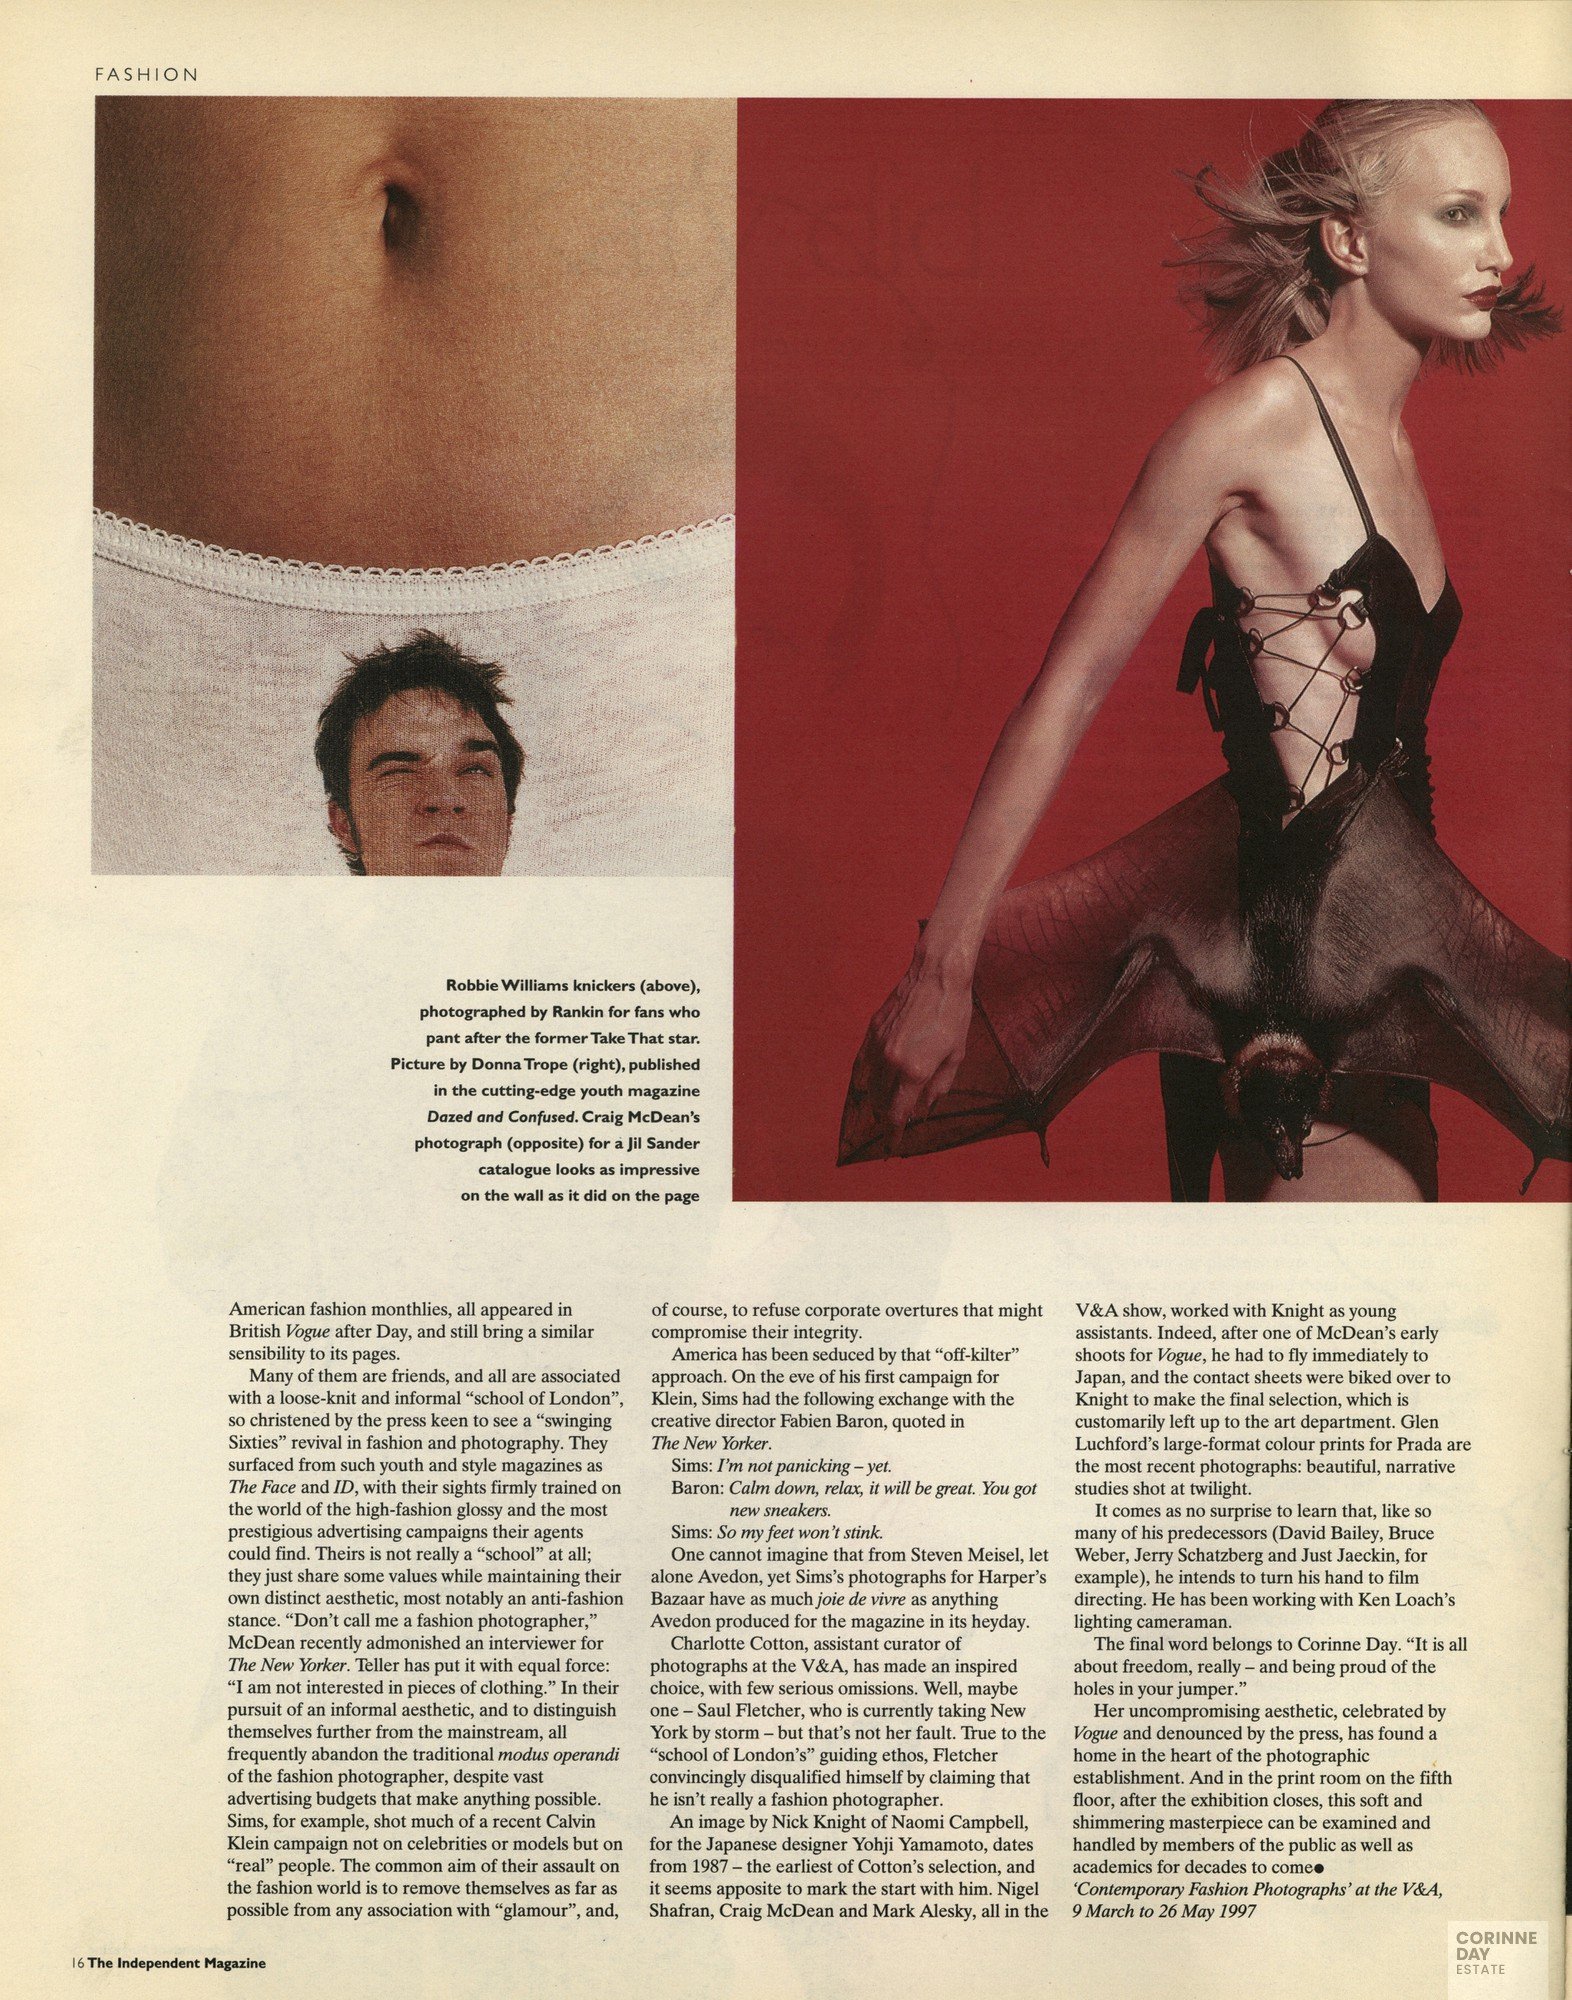 What Katy did, The Independent Magazine, 22 Feb 1997 — Image 3 of 3